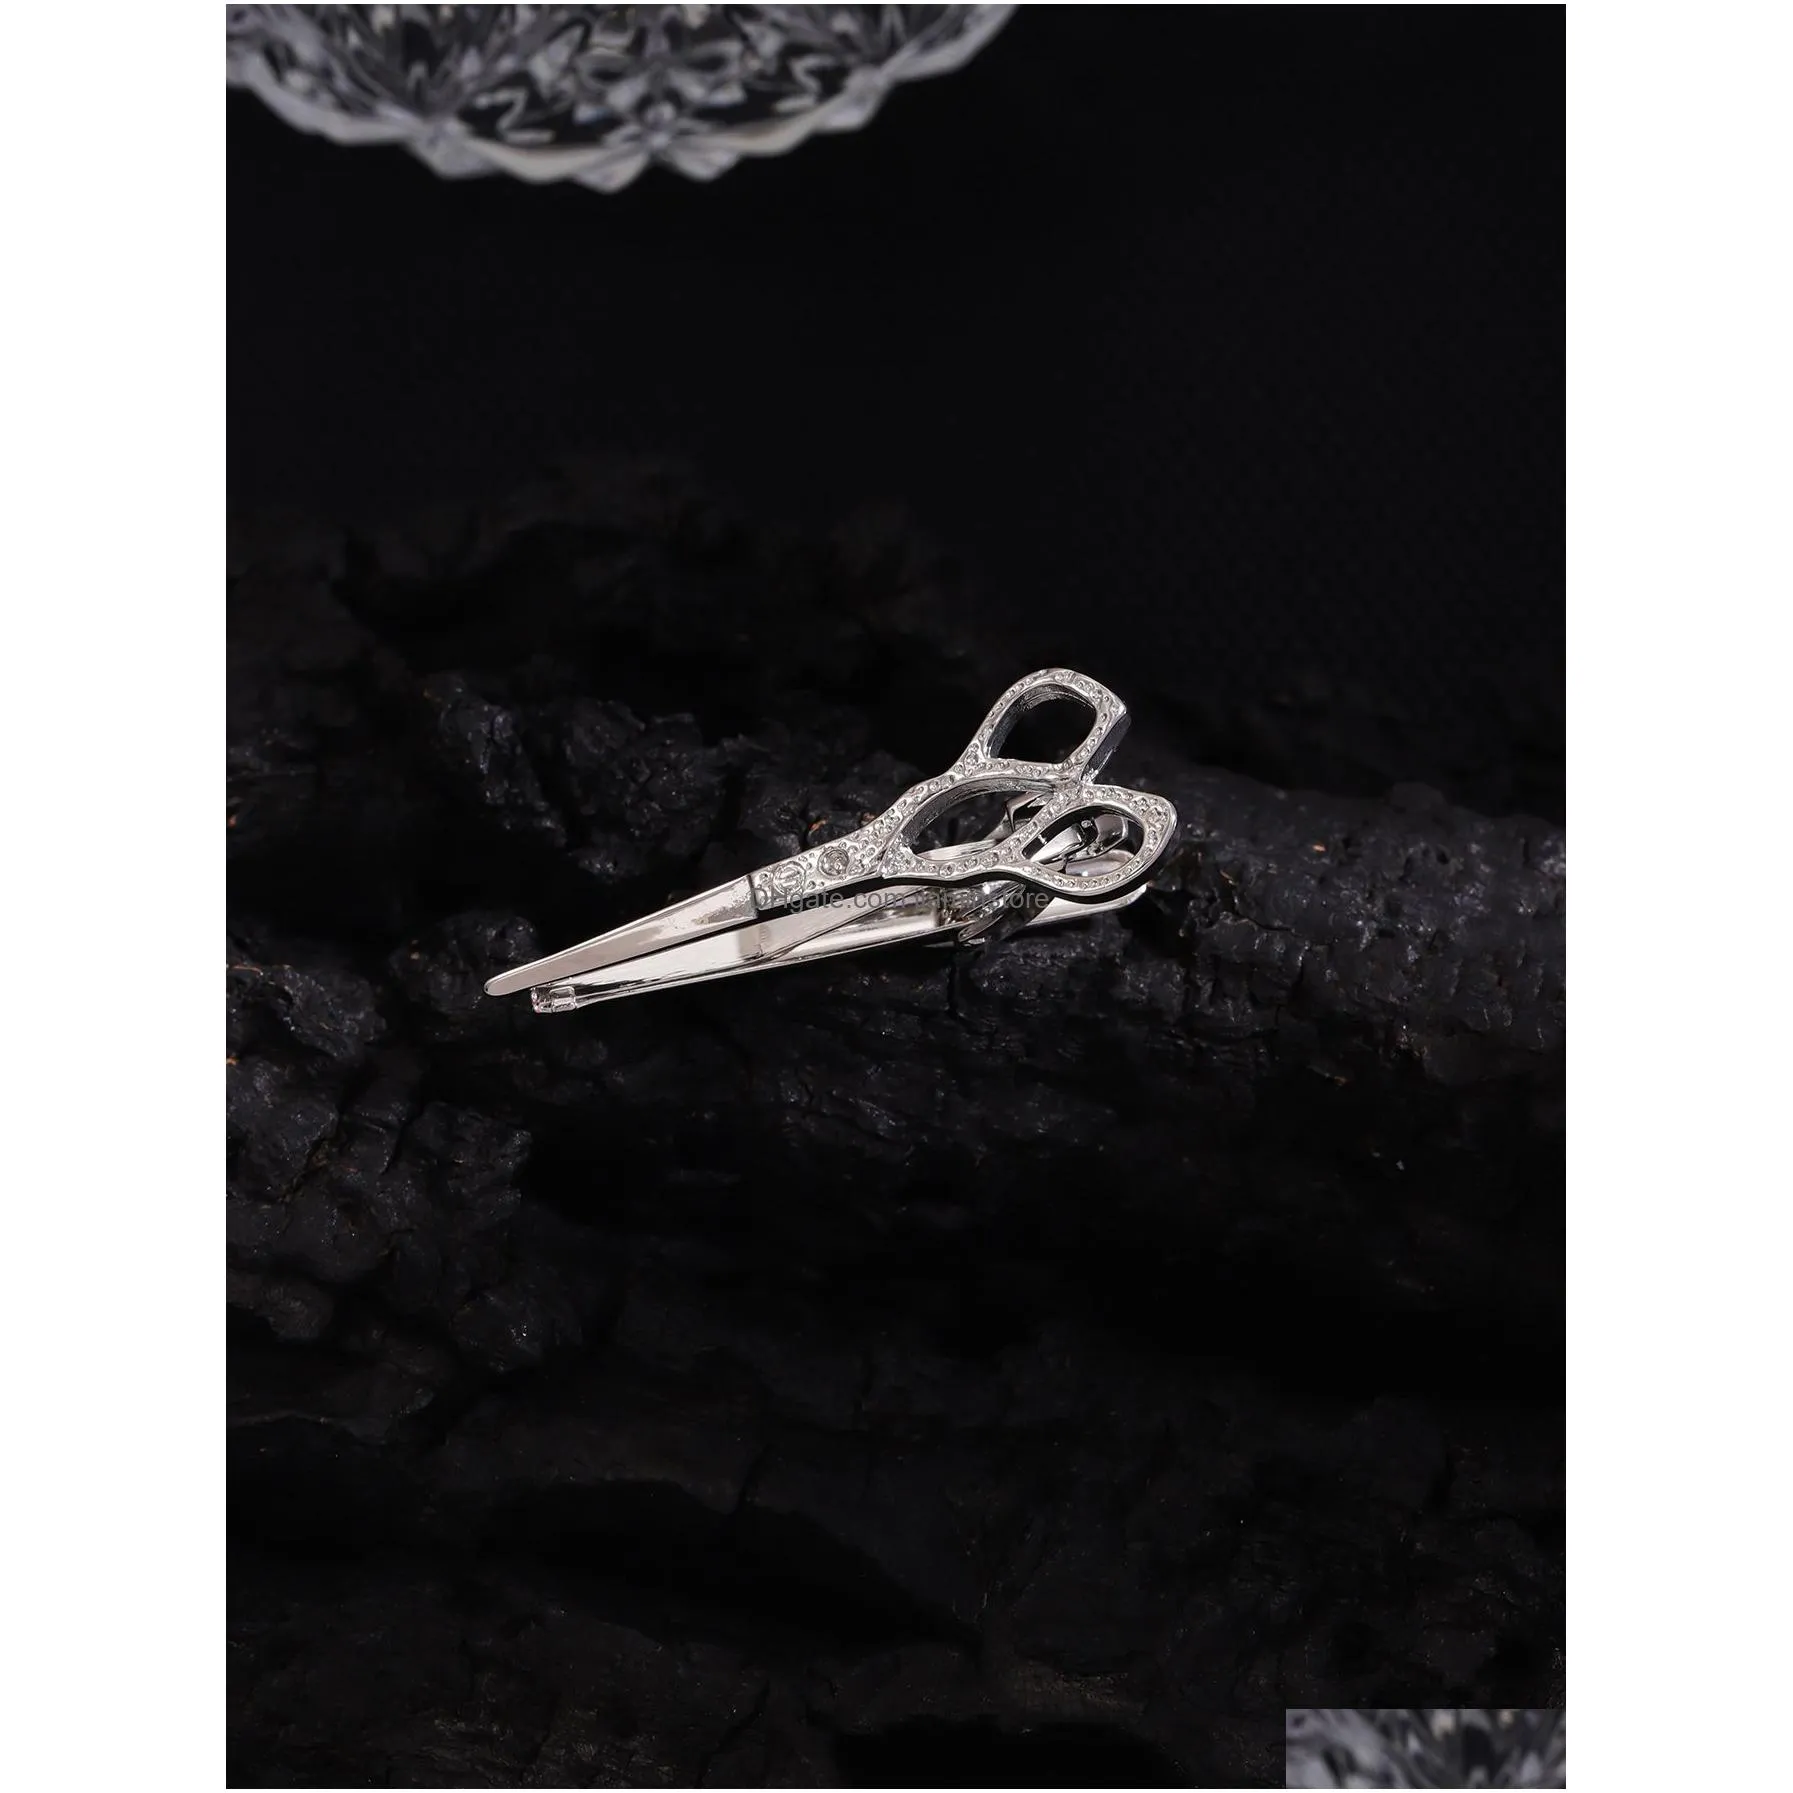 mens fashionable scissors-shaped tie clip with sparkling crystal accents